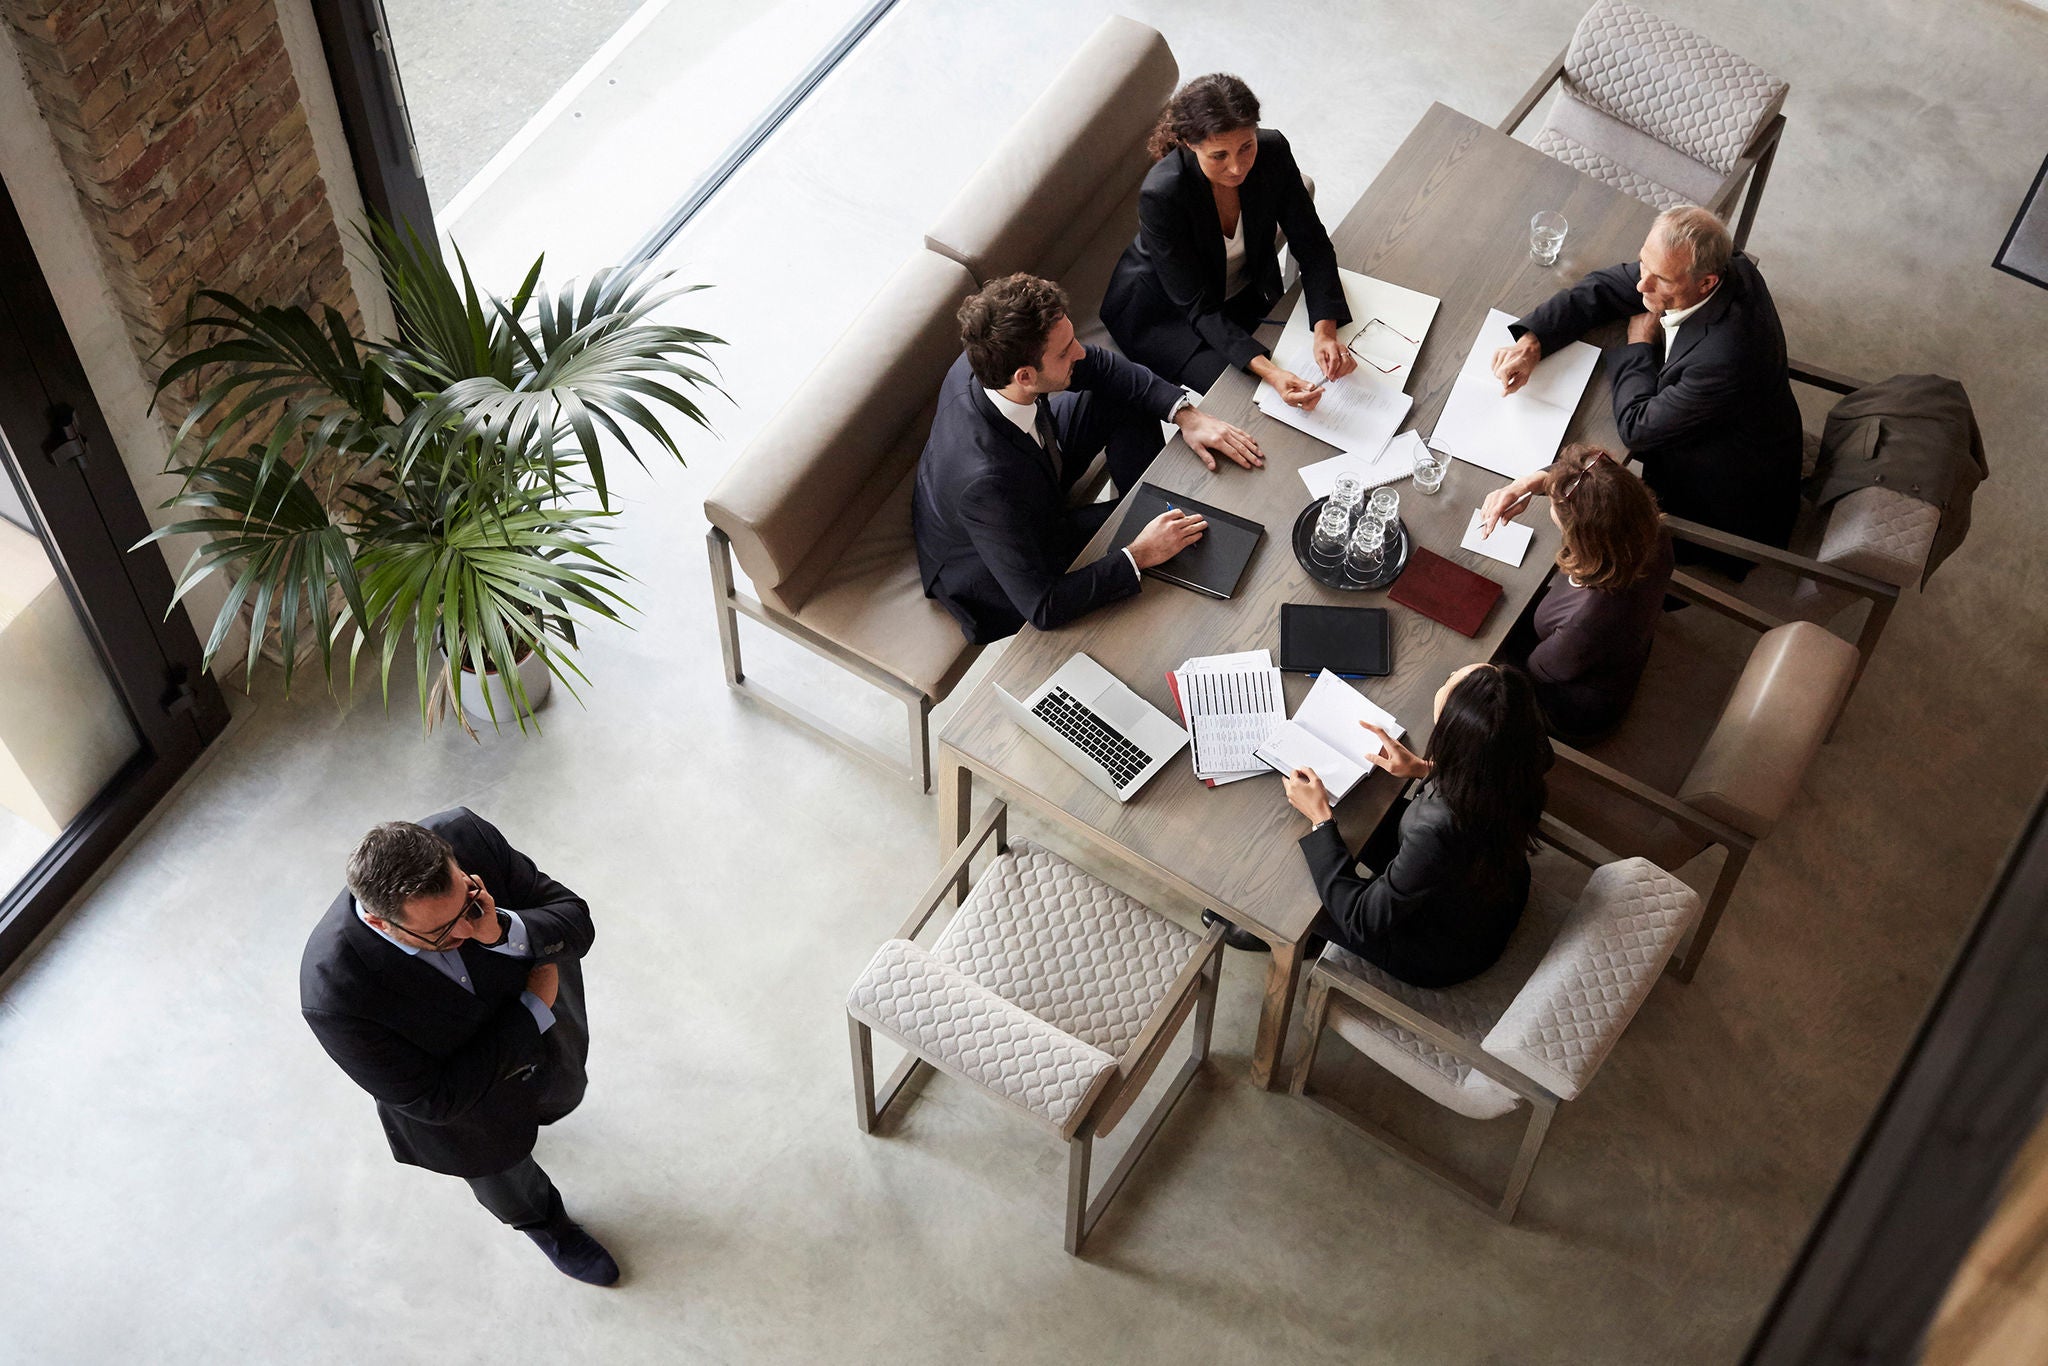 Team of financial advisors planning with business coworkers during meeting at law firm